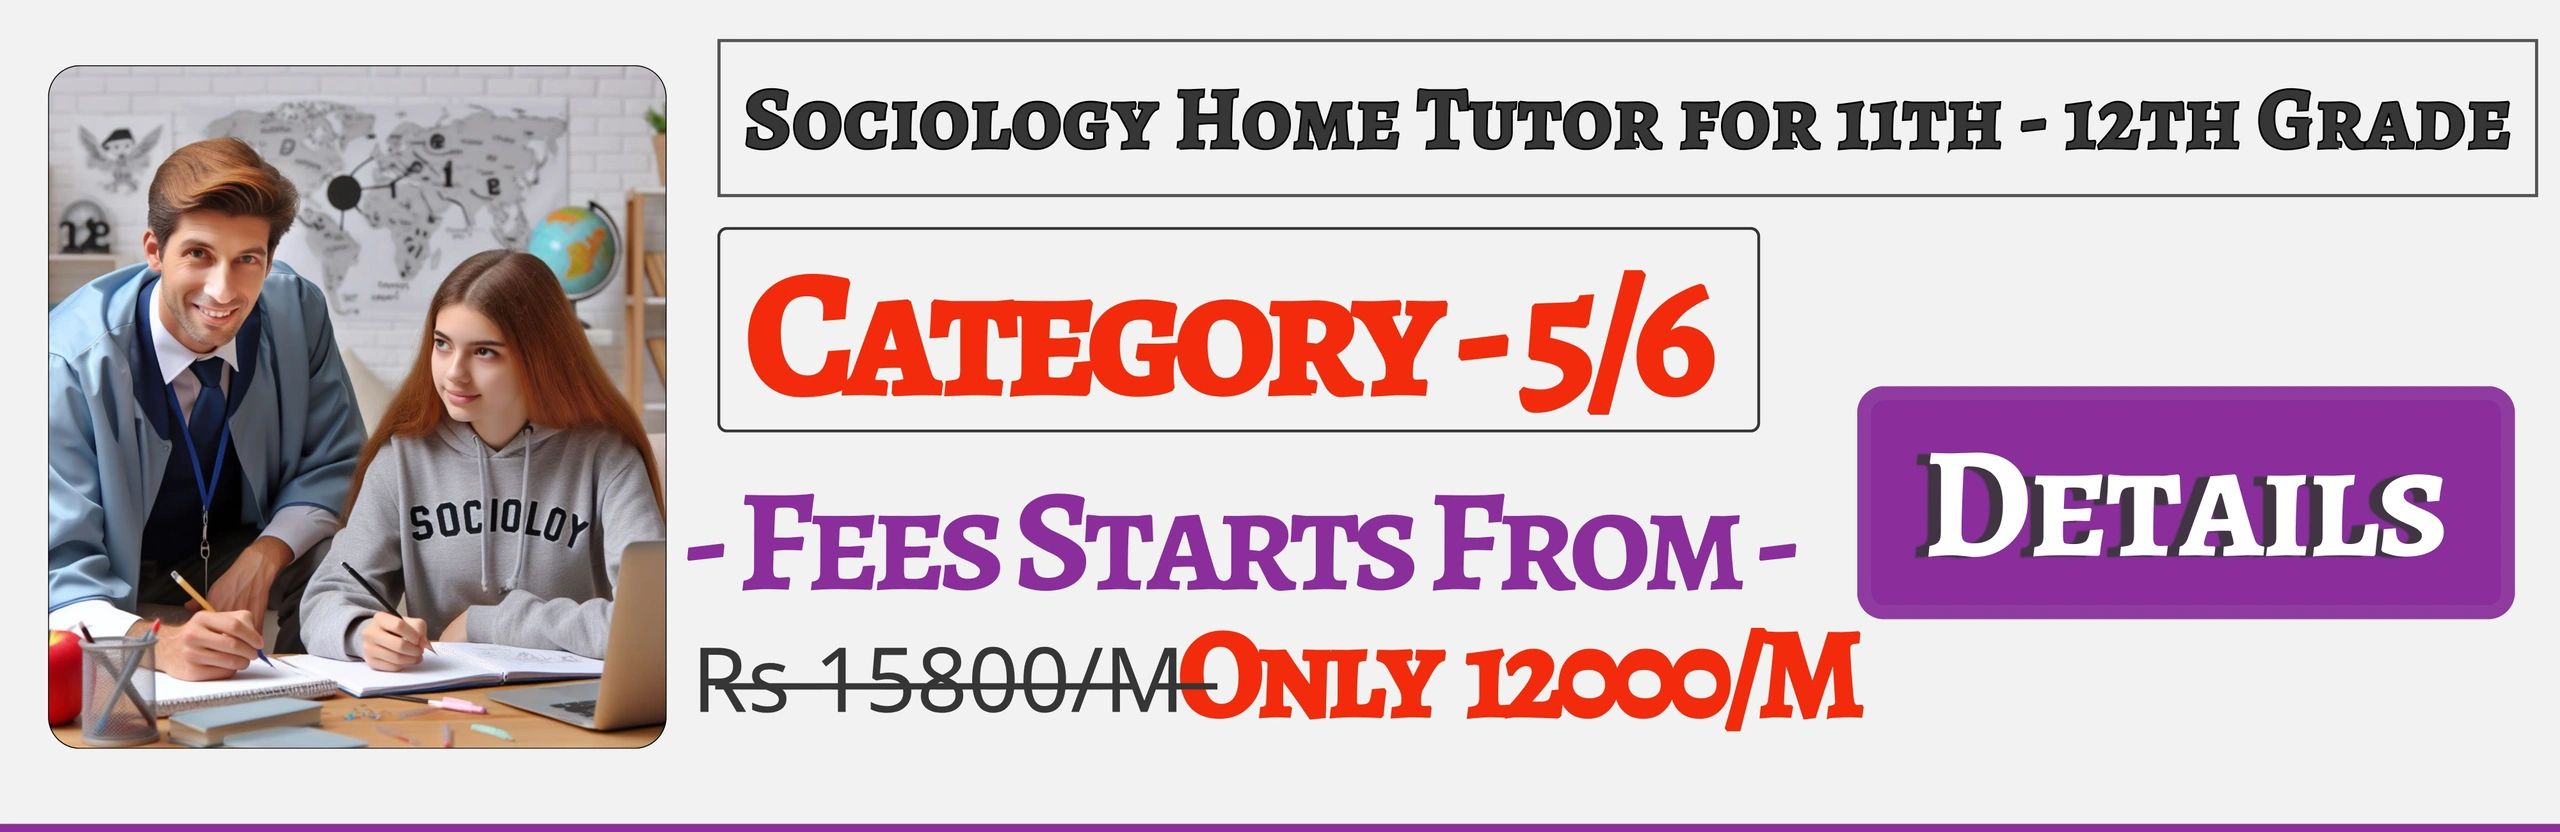 Book Best Nearby Sociology Home Tuition Tutors For 11th & 12th In Jaipur , Fees Only 12000/M